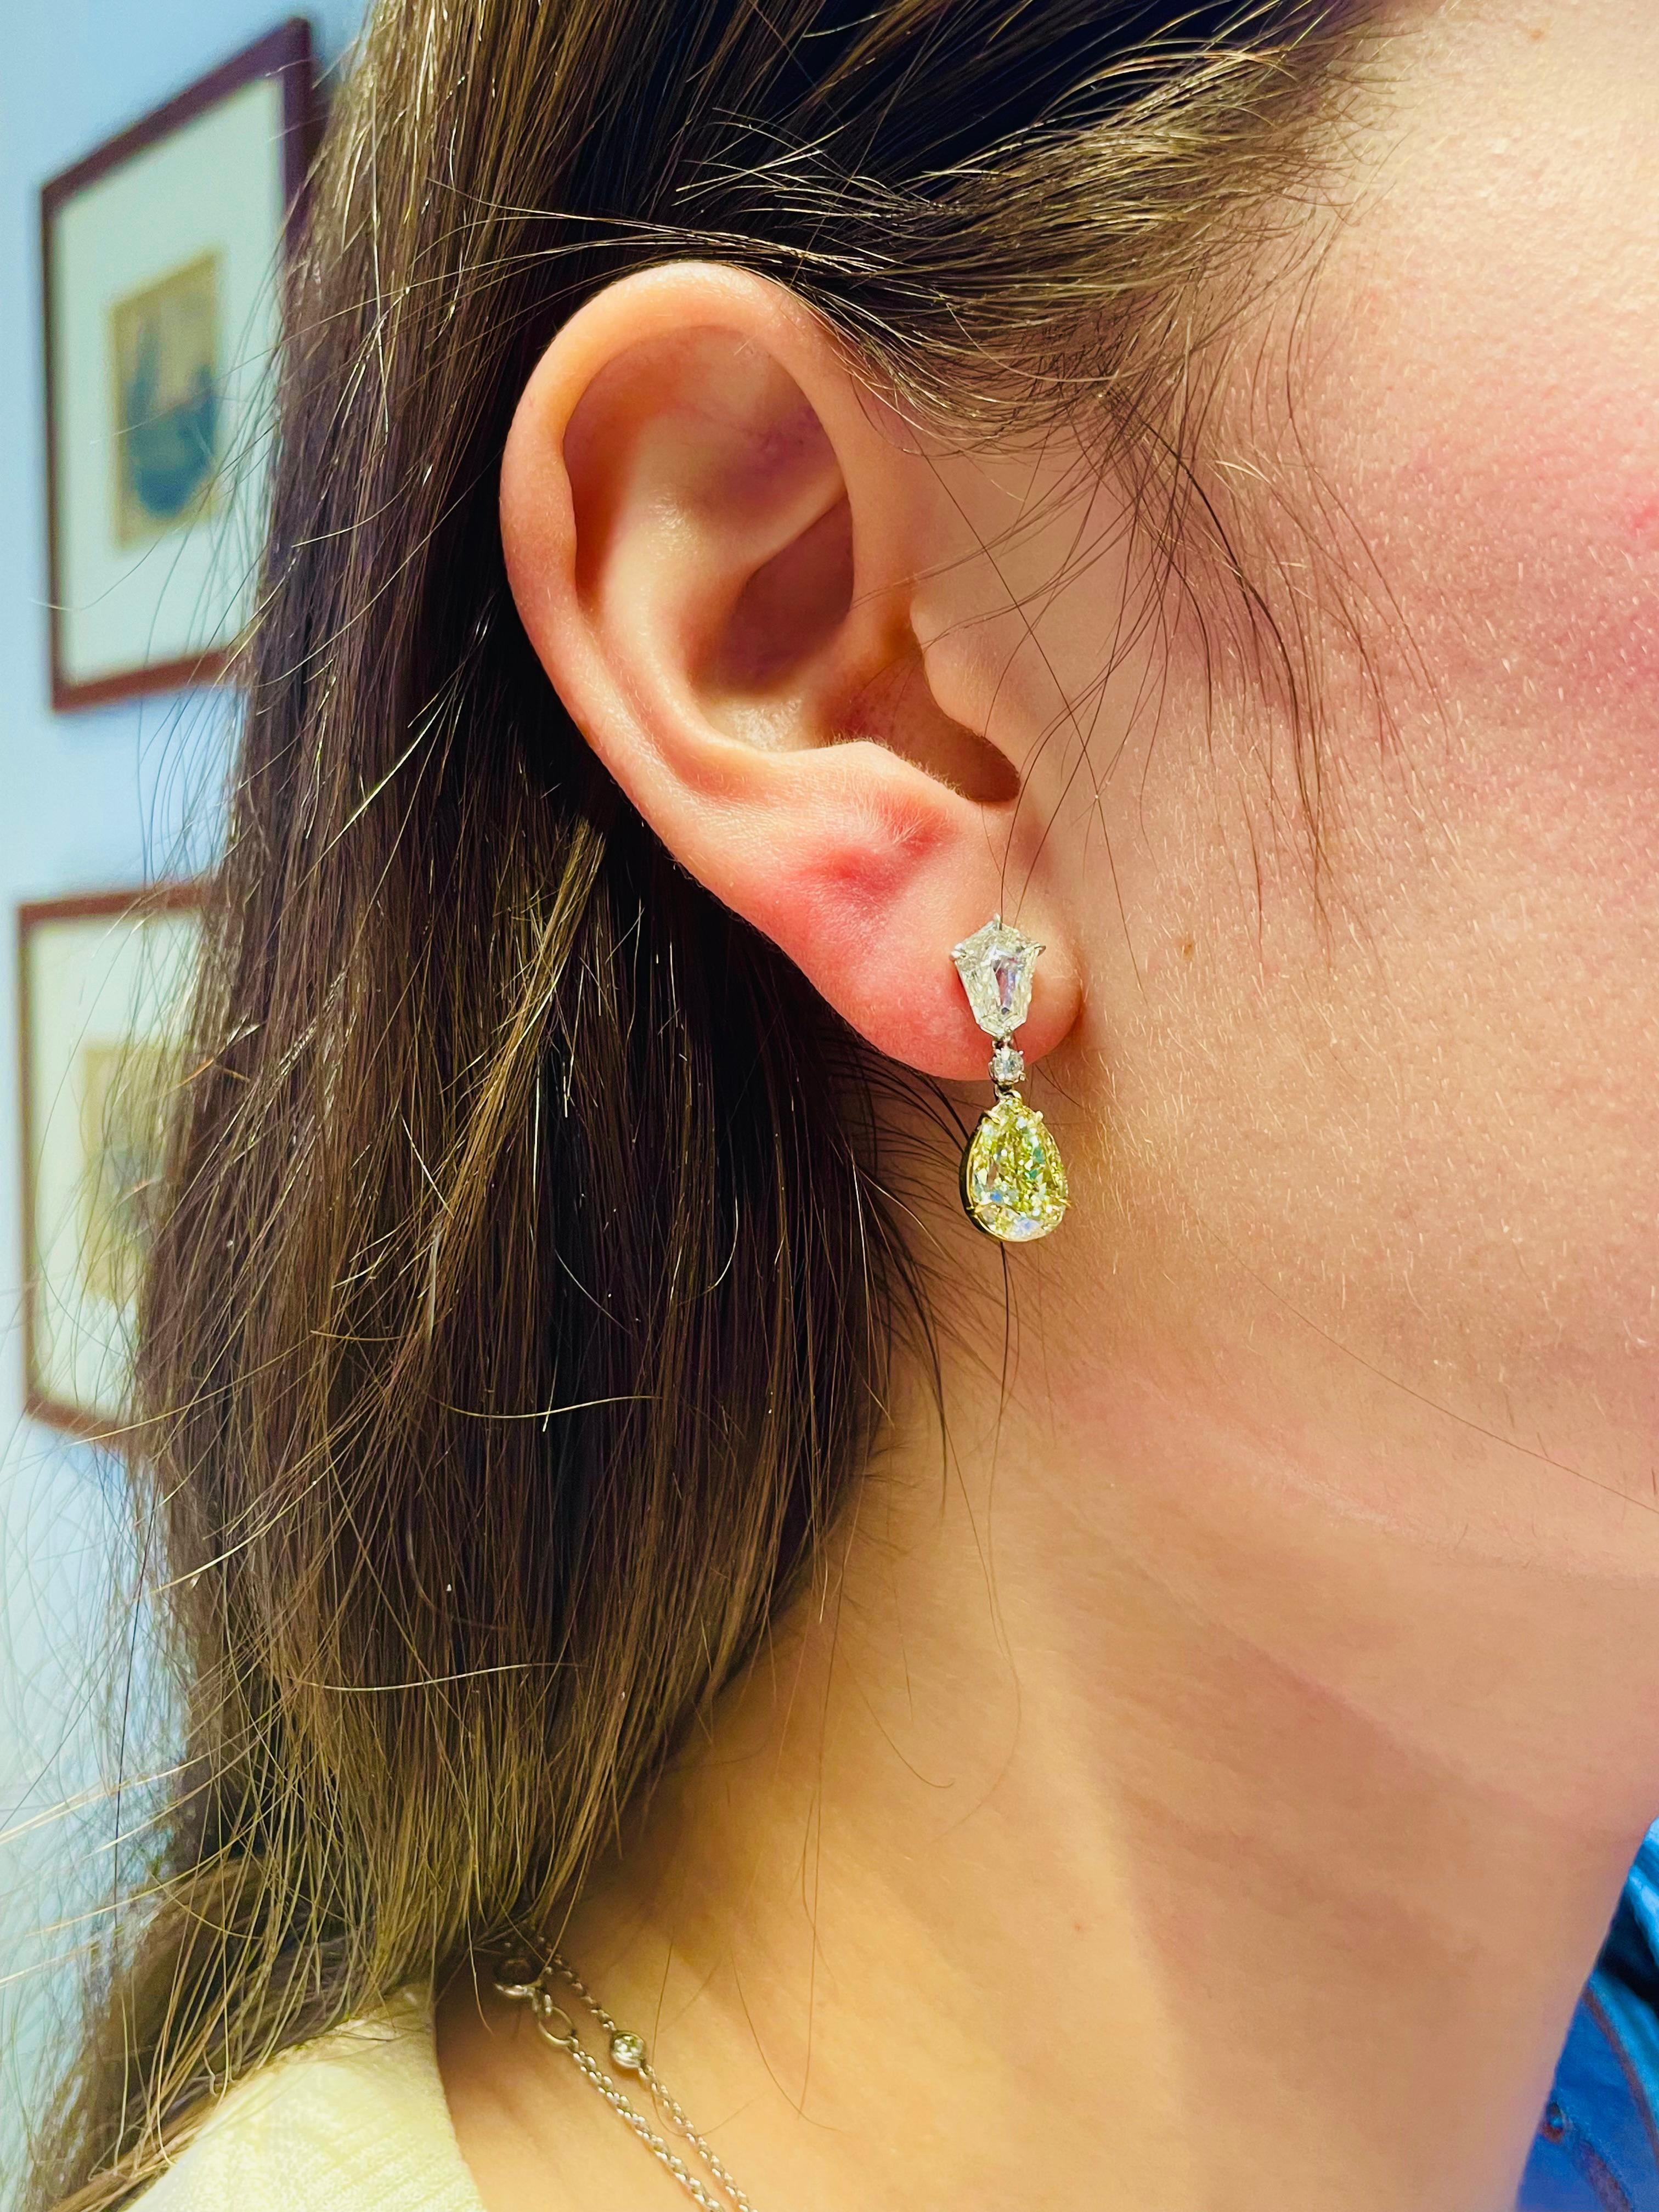 Sophisticated and classic, these yellow diamond drop earrings add a gorgeous pop of sparkle and color. Two beautifully matched fancy light yellow pear shape diamonds (5.44 carats total) dangle from two white kite diamonds (totaling 1.59 carats) and